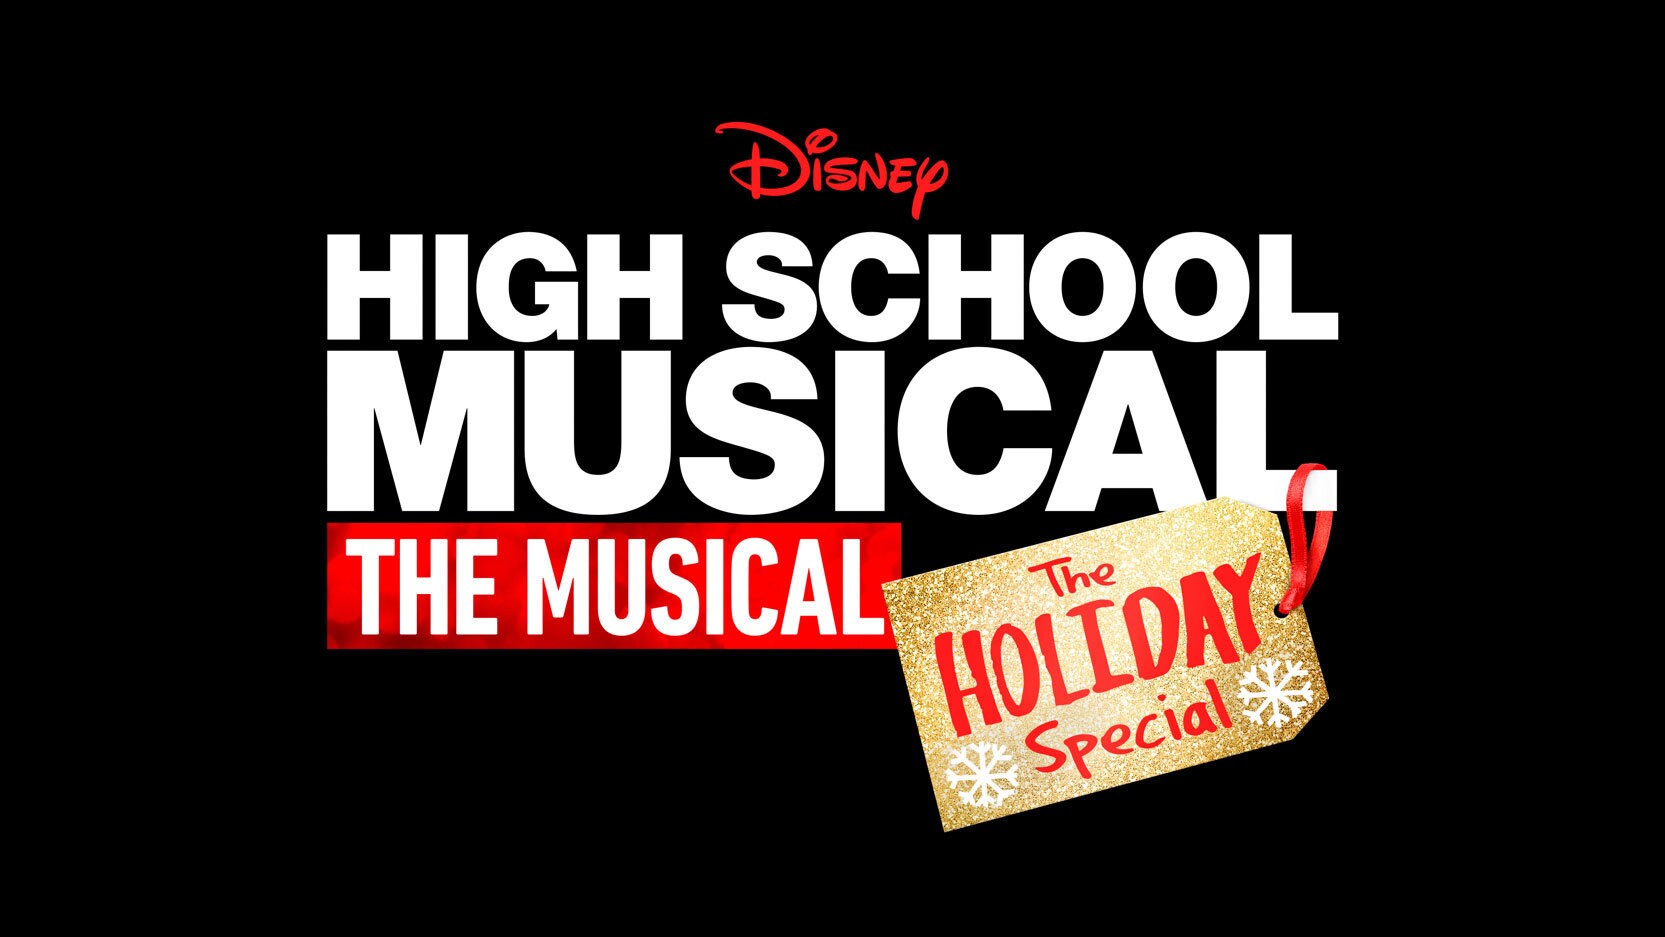 Do you hear what I hear? "High School Musical: The Musical: The Holiday Special" streaming Friday, December 11 on Disney+